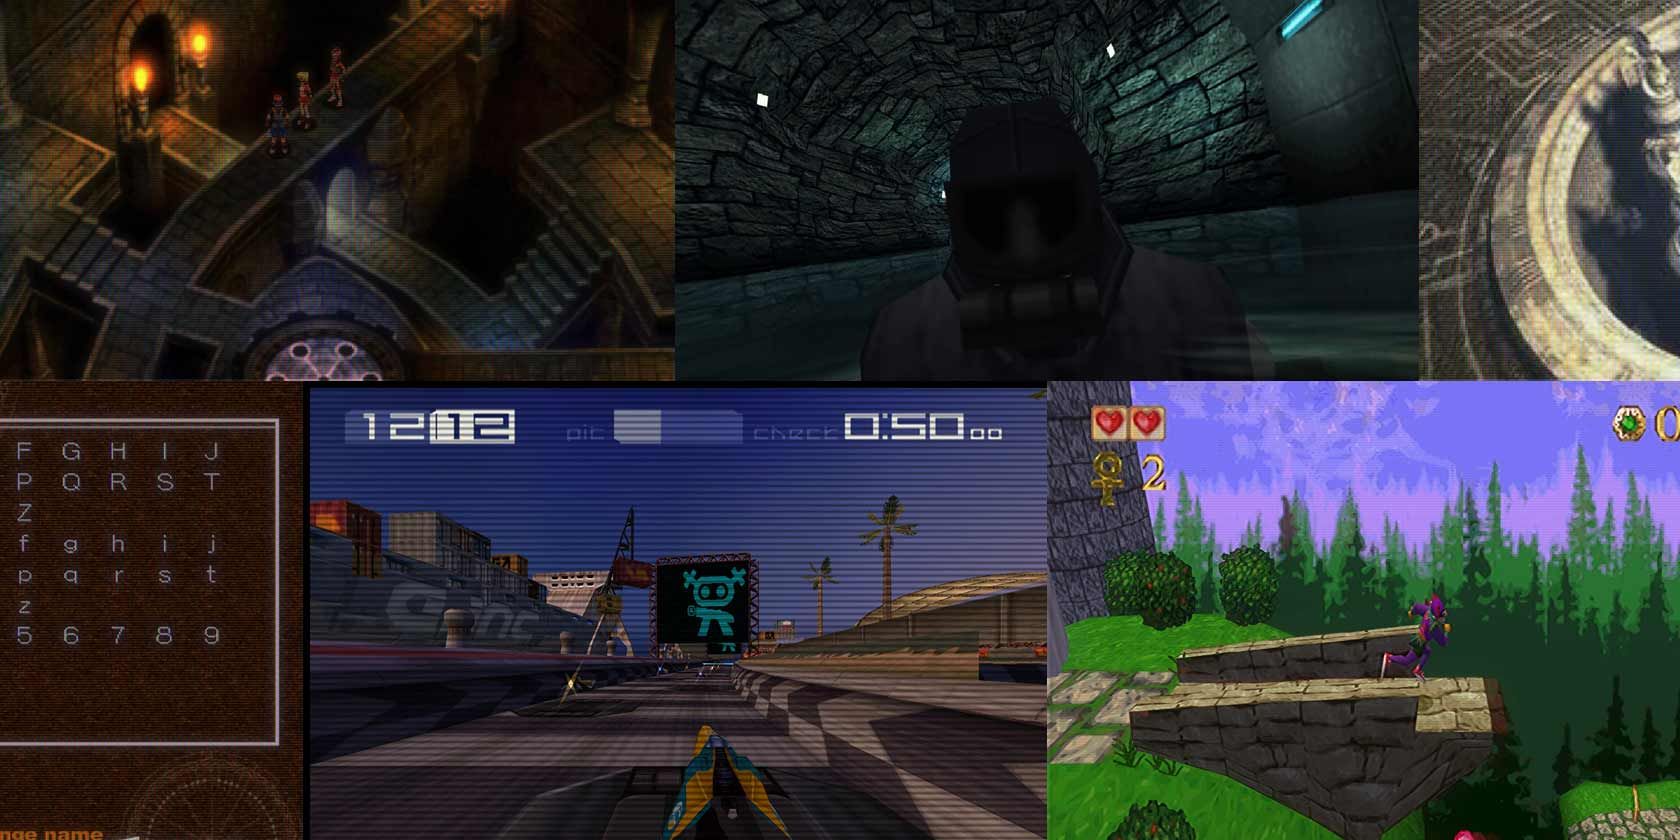 How to Make Your Retro Games Look Like They Used to With RetroArch’s Shaders